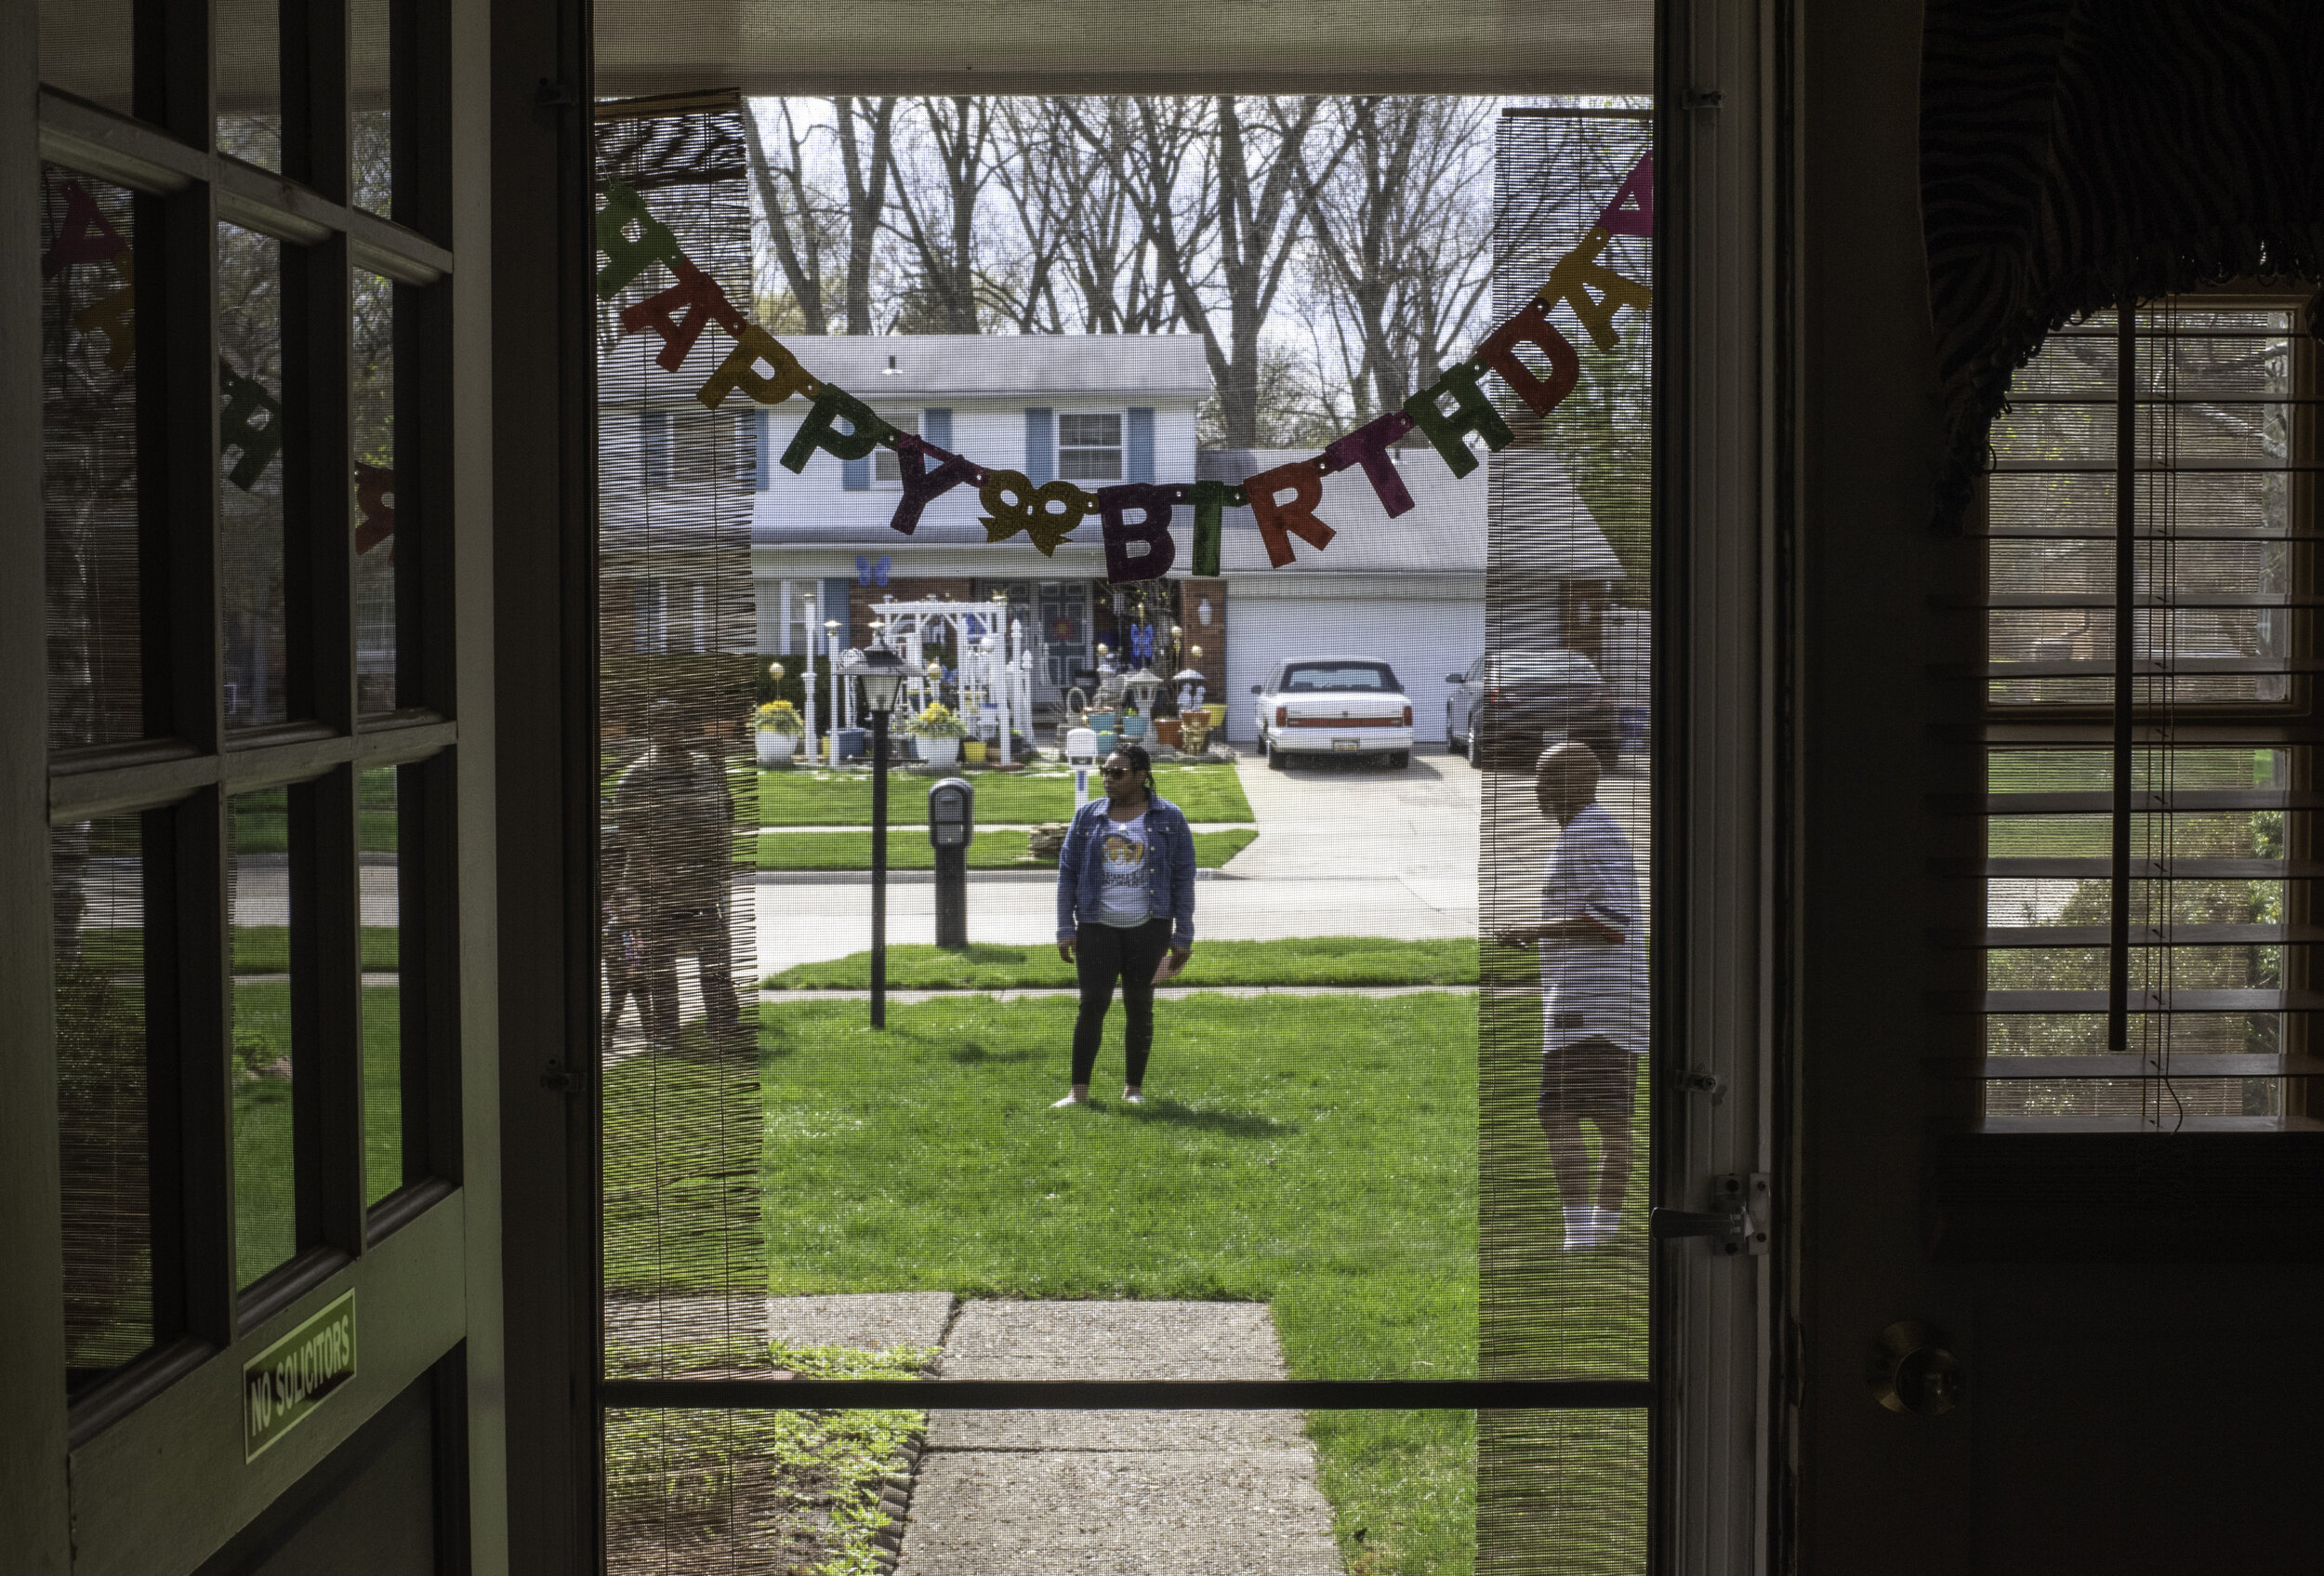   My family and I celebrated my mom’s birthday-the second social distancing style birthday celebration we’ve had since the pandemic. (Southfield, MI on Saturday, May 2, 2020)  